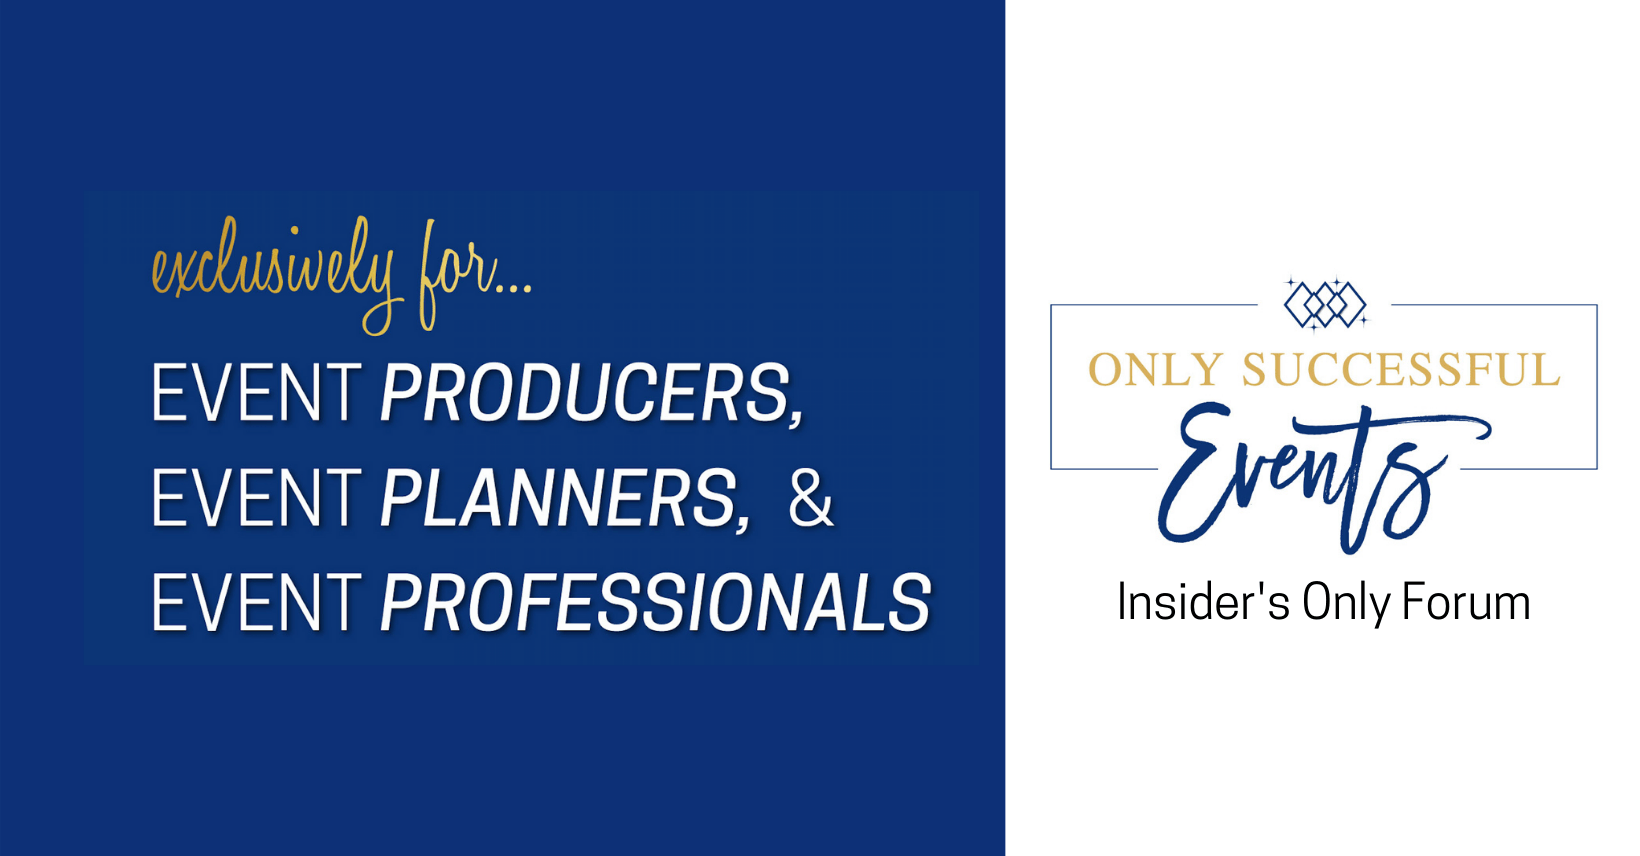 Facebook Group Cover Banner with Only Successful Events Logo | Blue Background with text that says exclusively for event producers, event planners, and event professionals